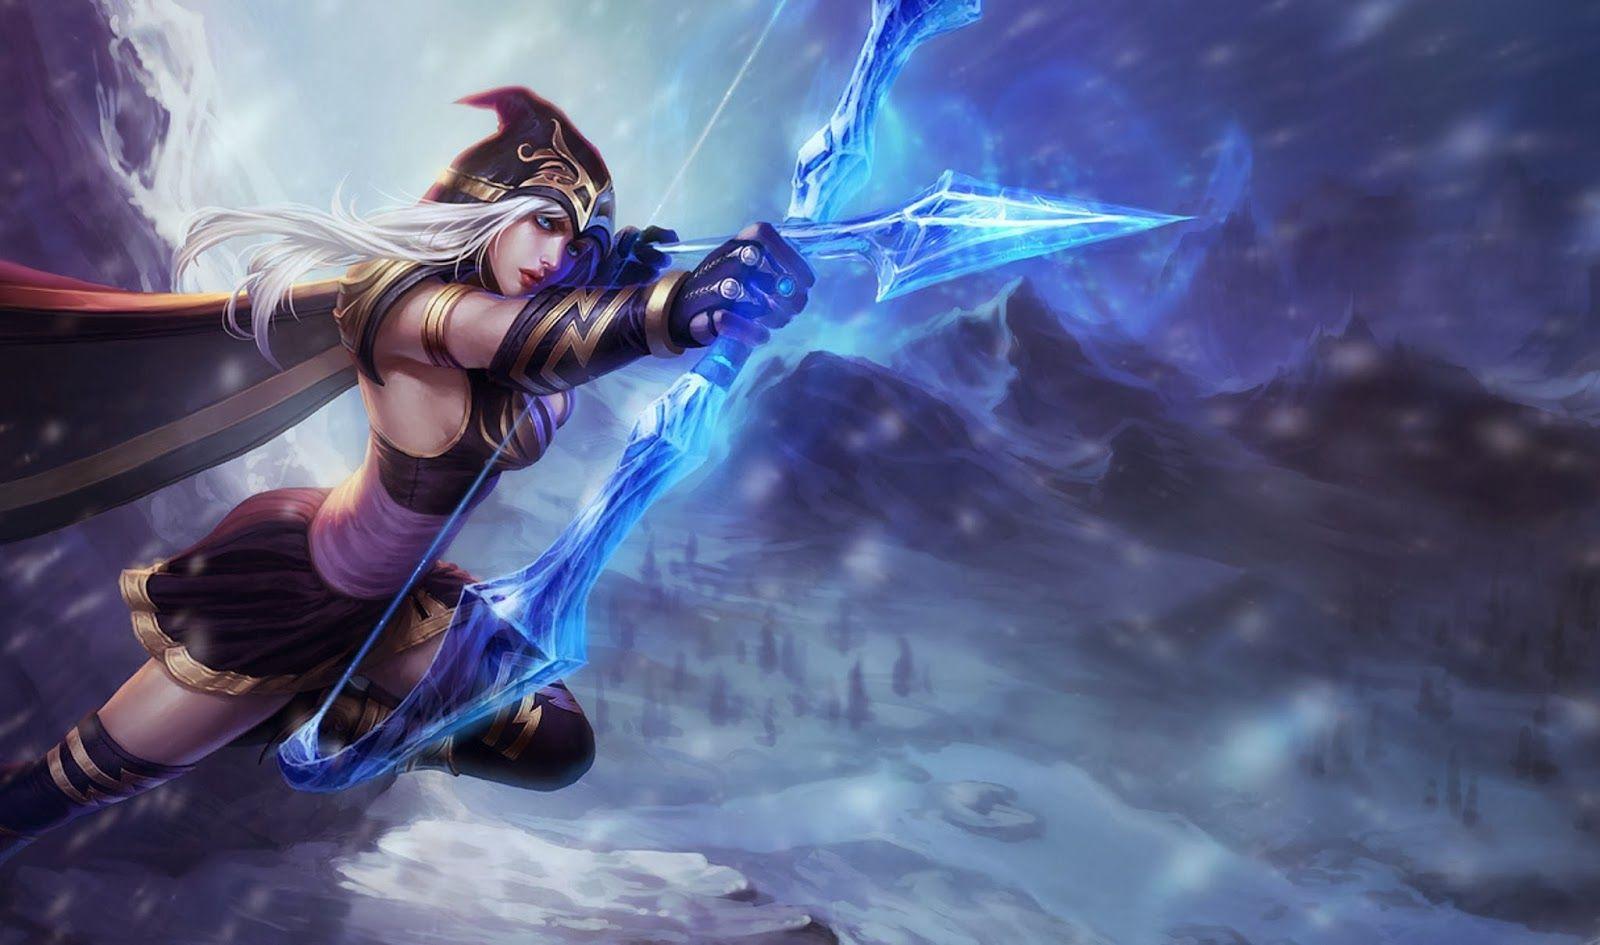 League Of Legends Wallpaper and Cover Photo BLÓG: Ashe League of Legends Wallpaper, Ashe Desktop Wallpaper